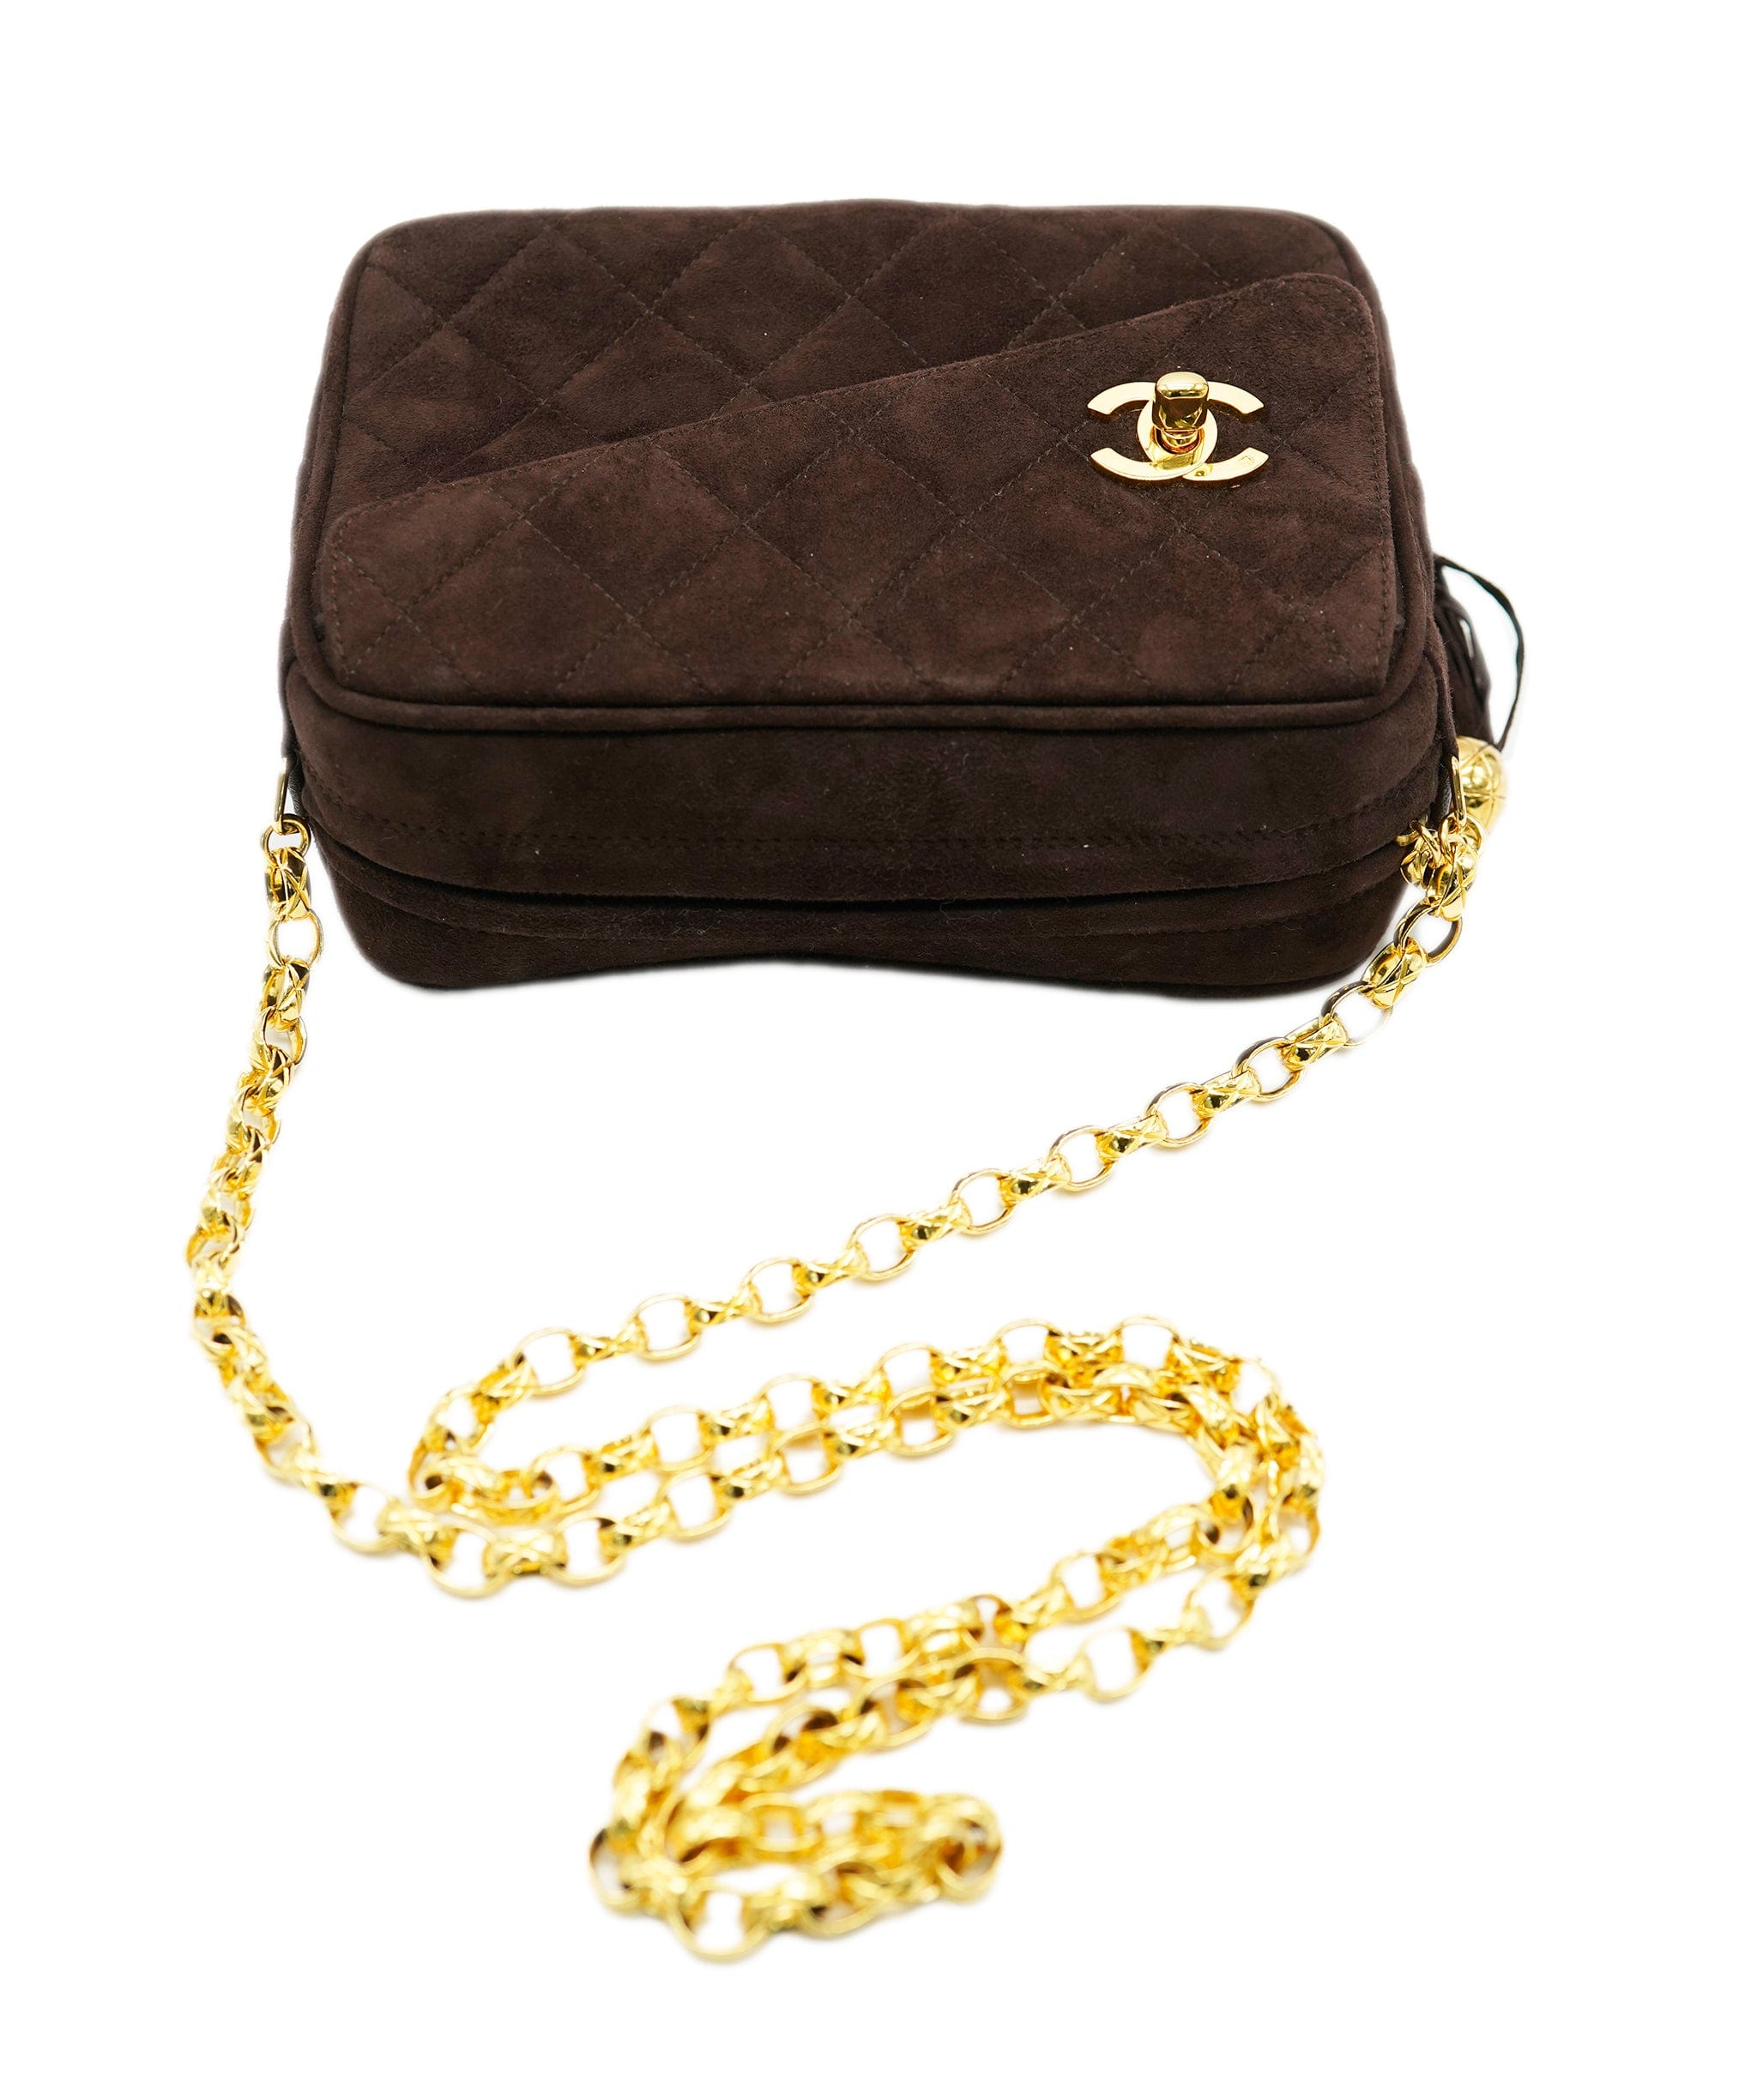 Chanel Chanel chocolate brown suede camera bag with GHW AJL0177